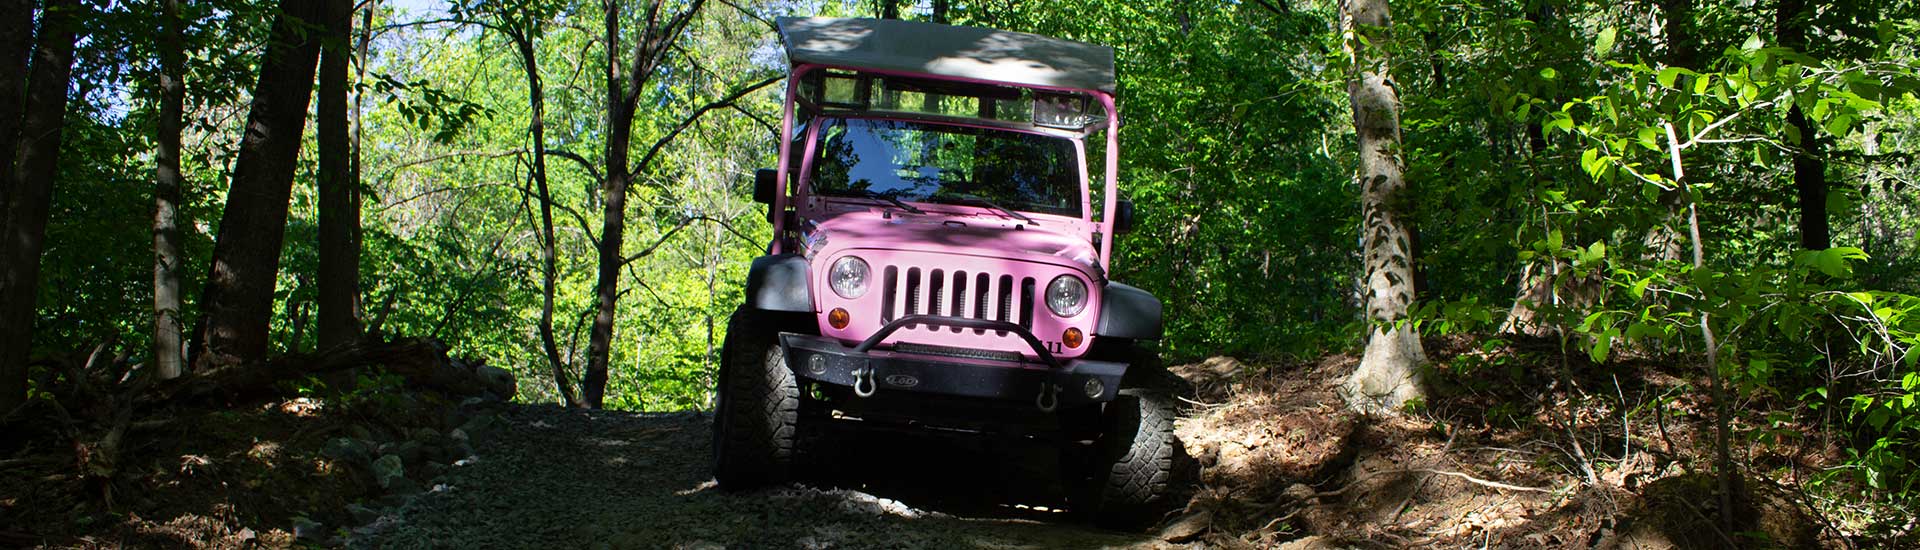 Front close-up of Pink Jeep Tours' Jeep Wrangler ascending the private, 4x4 Bear Track trail surrounded by forest.